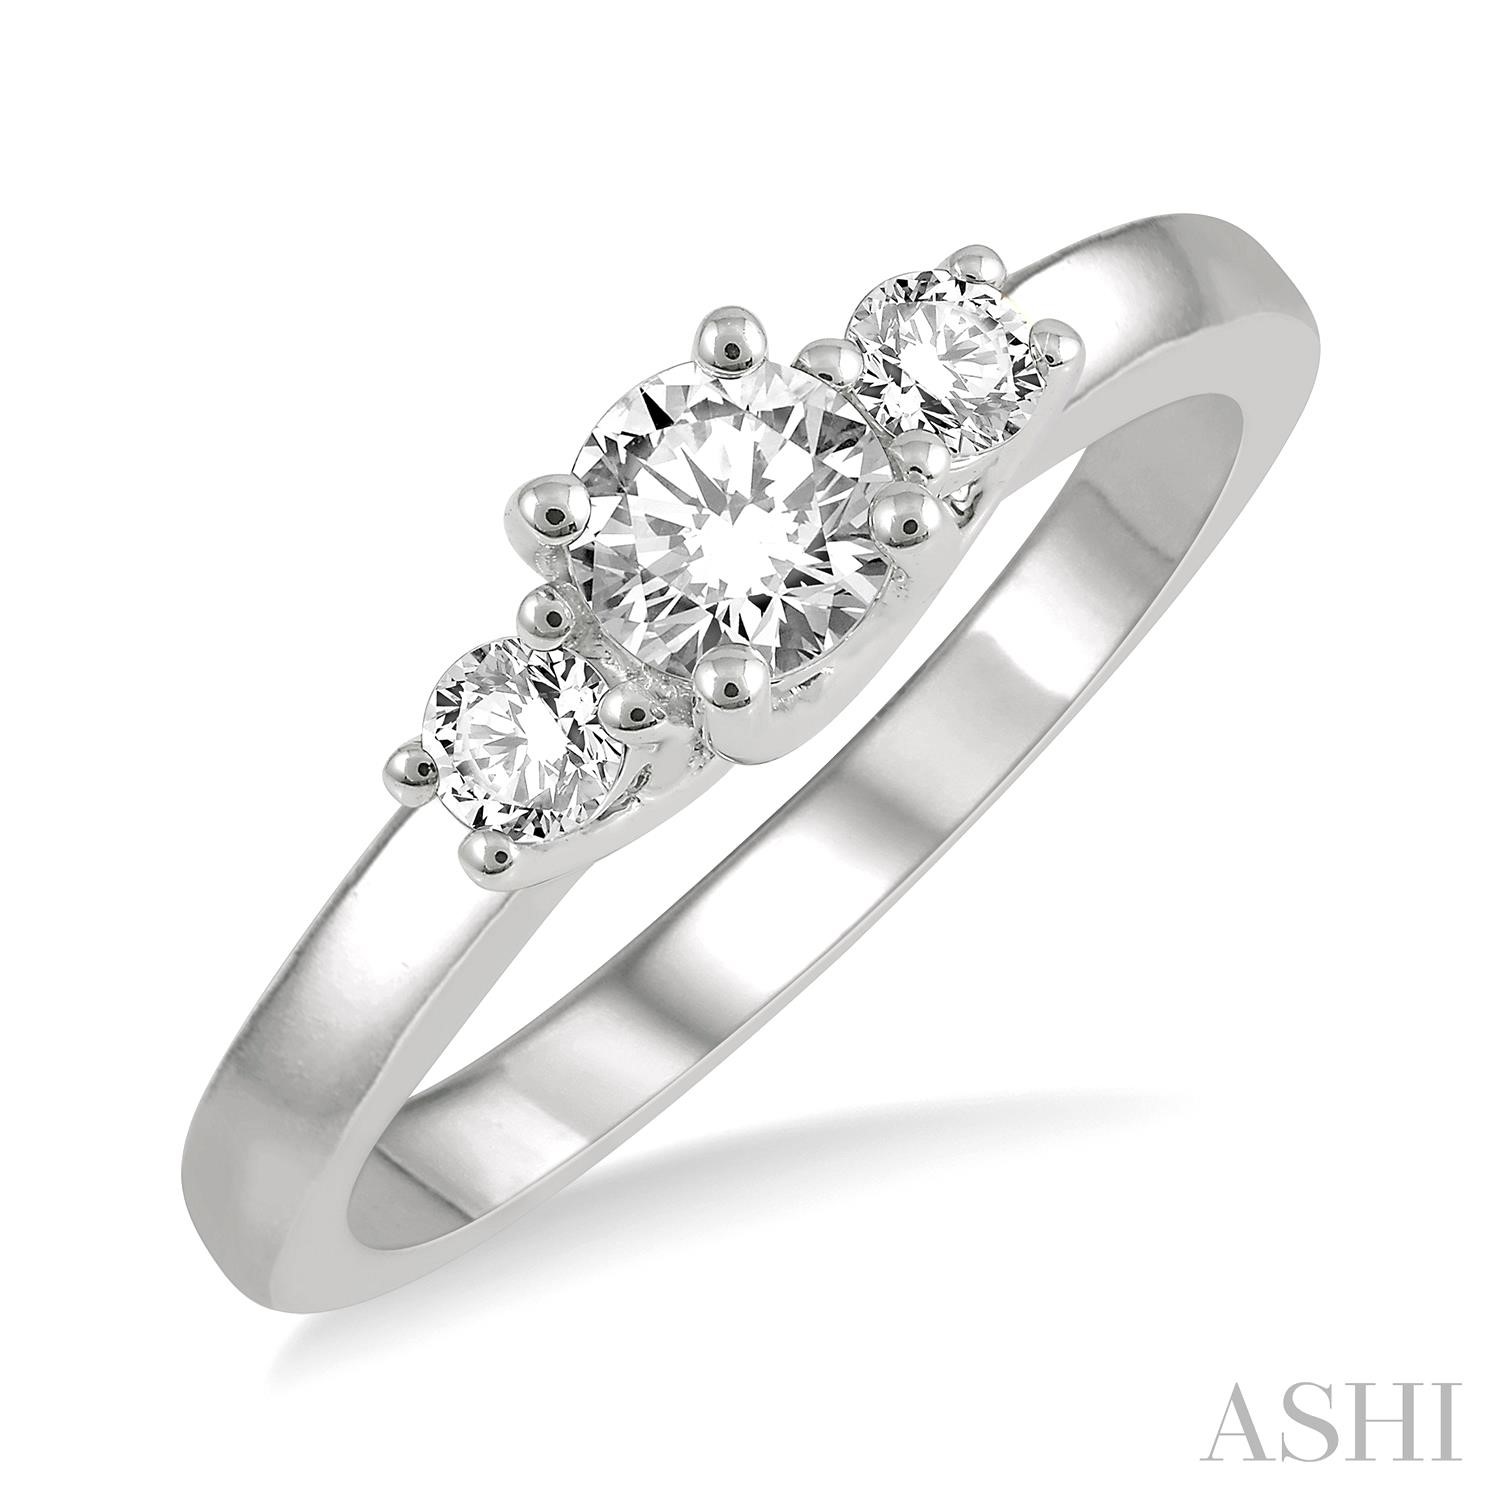 14K WHITE GOLD 3 STONE DIAMOND RING SIZE 6.5 WITH ONE 0.35CT ROUND I-J SI3-I1 DIAMOND AND 2=0.15TW ROUND I-J SI3-I1 DIAMONDS